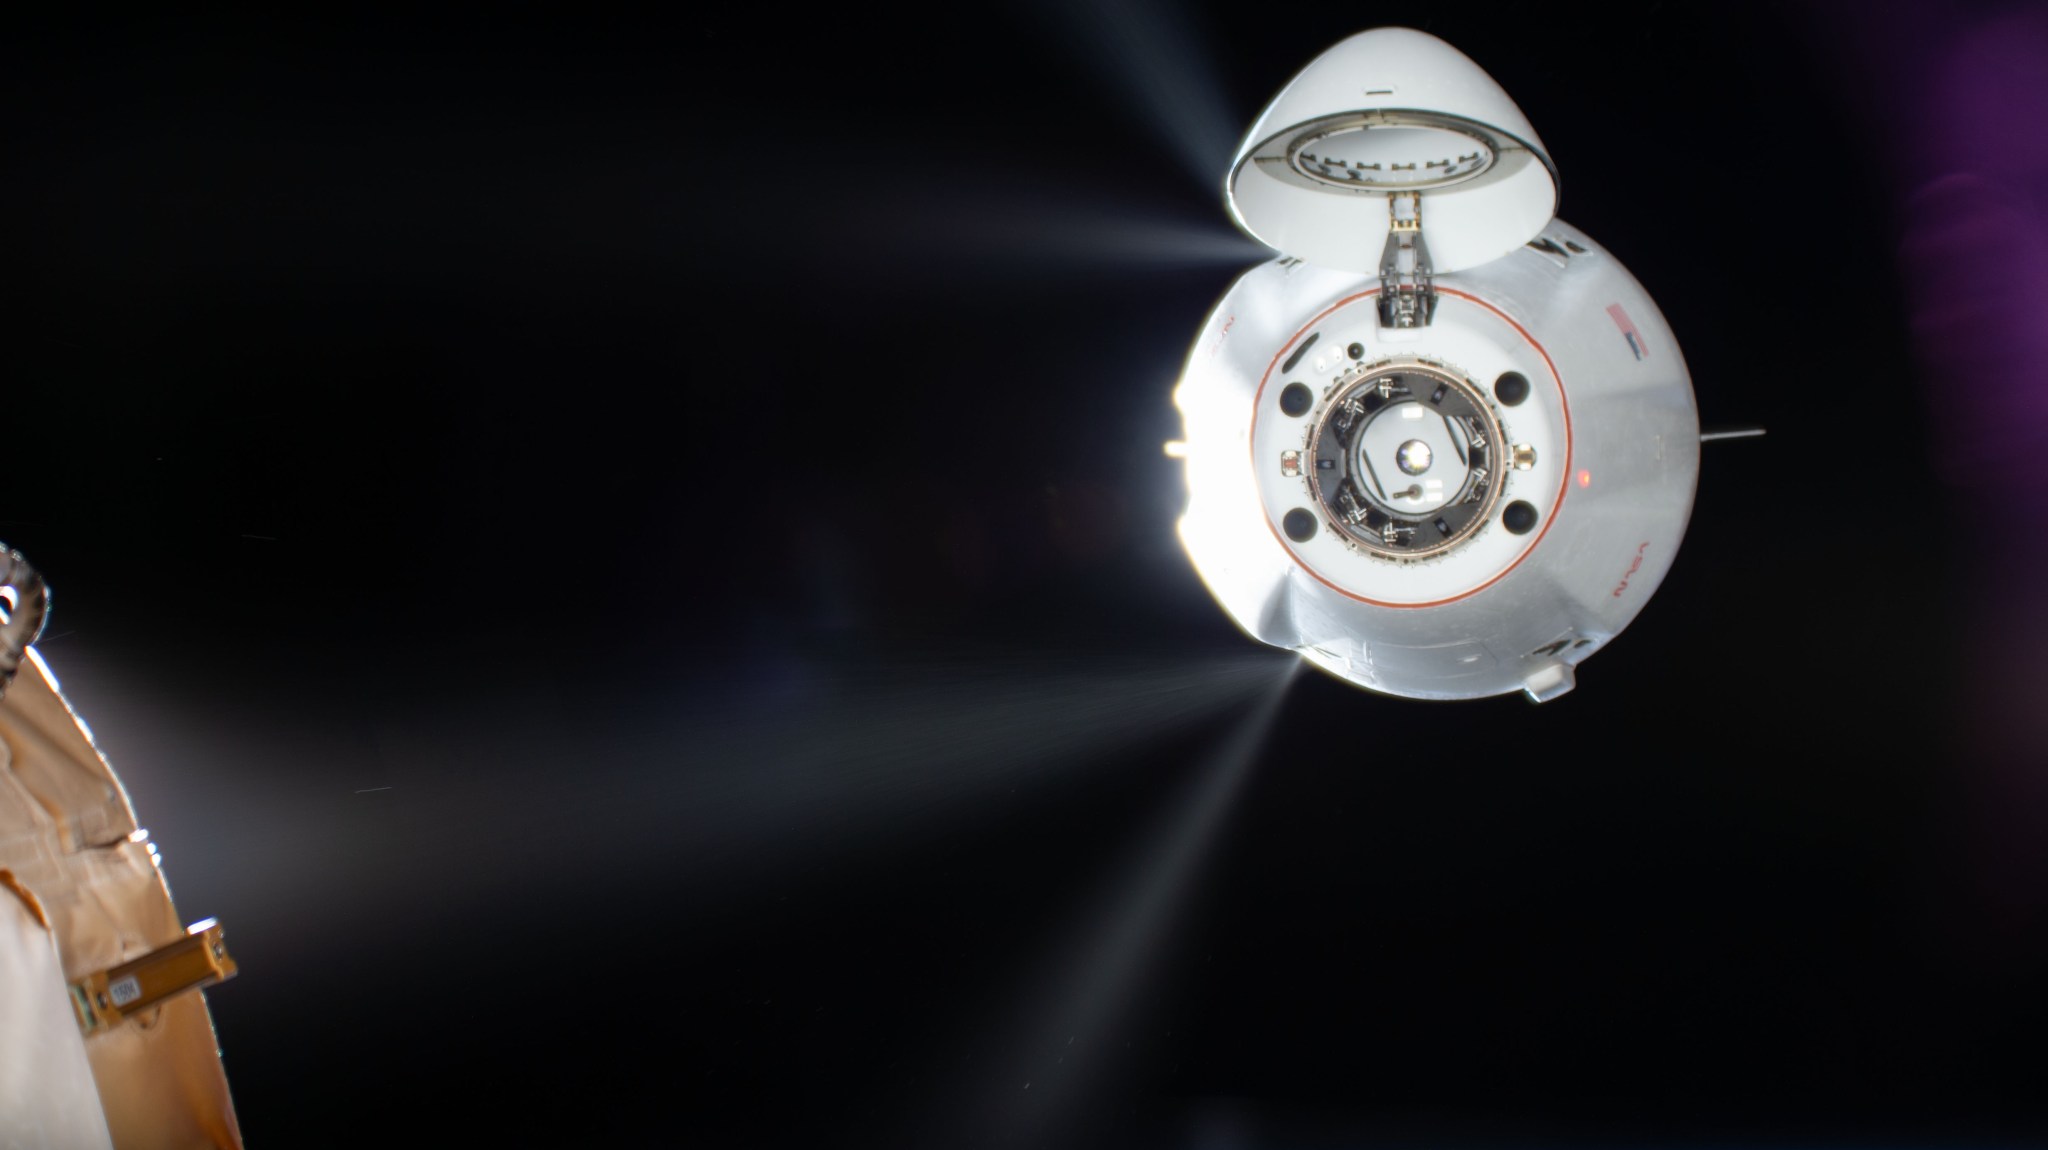 A white Dragon spacecraft approaches the station against the blackness of space. Its top hatch is open, revealing the docking ring, and jets of propulsion fuel are visible shooting from its top and bottom on the left side. A portion of the station is visible at the bottom left of the image.